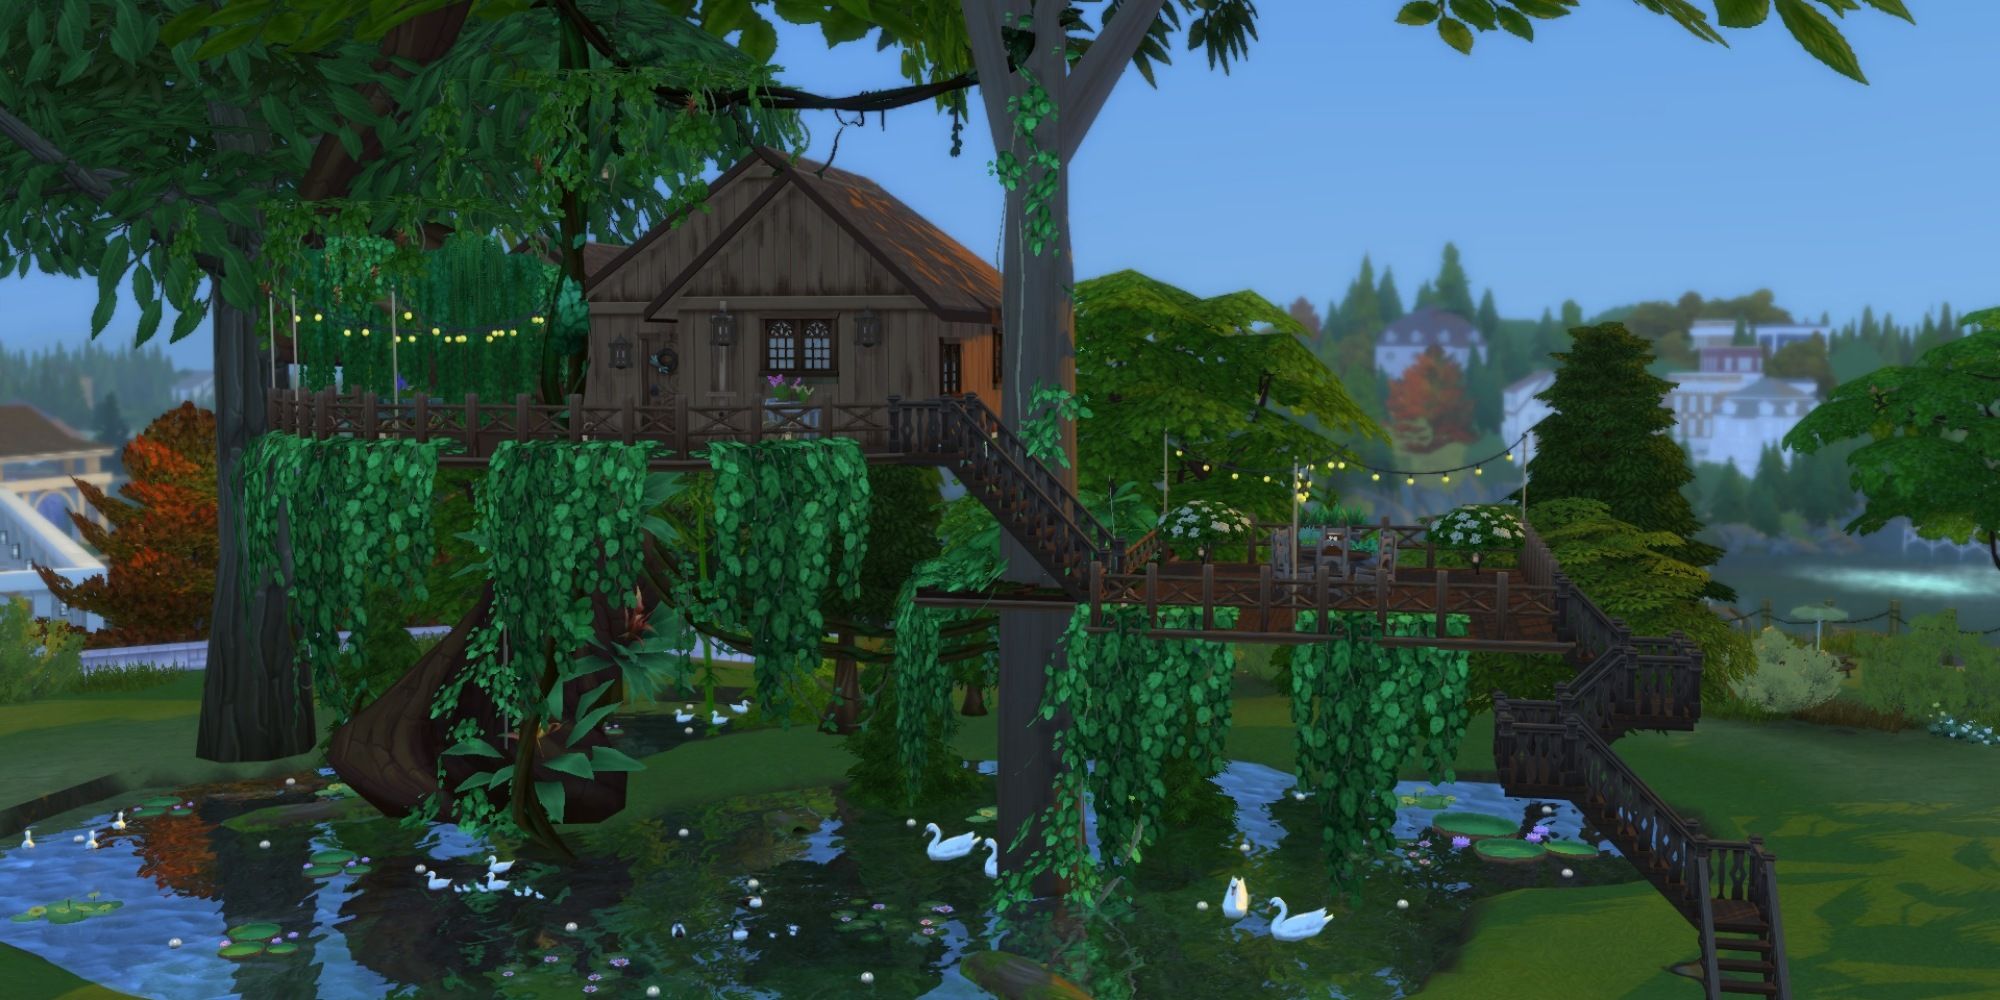 cover image for the sims 4 how to build a treehouse